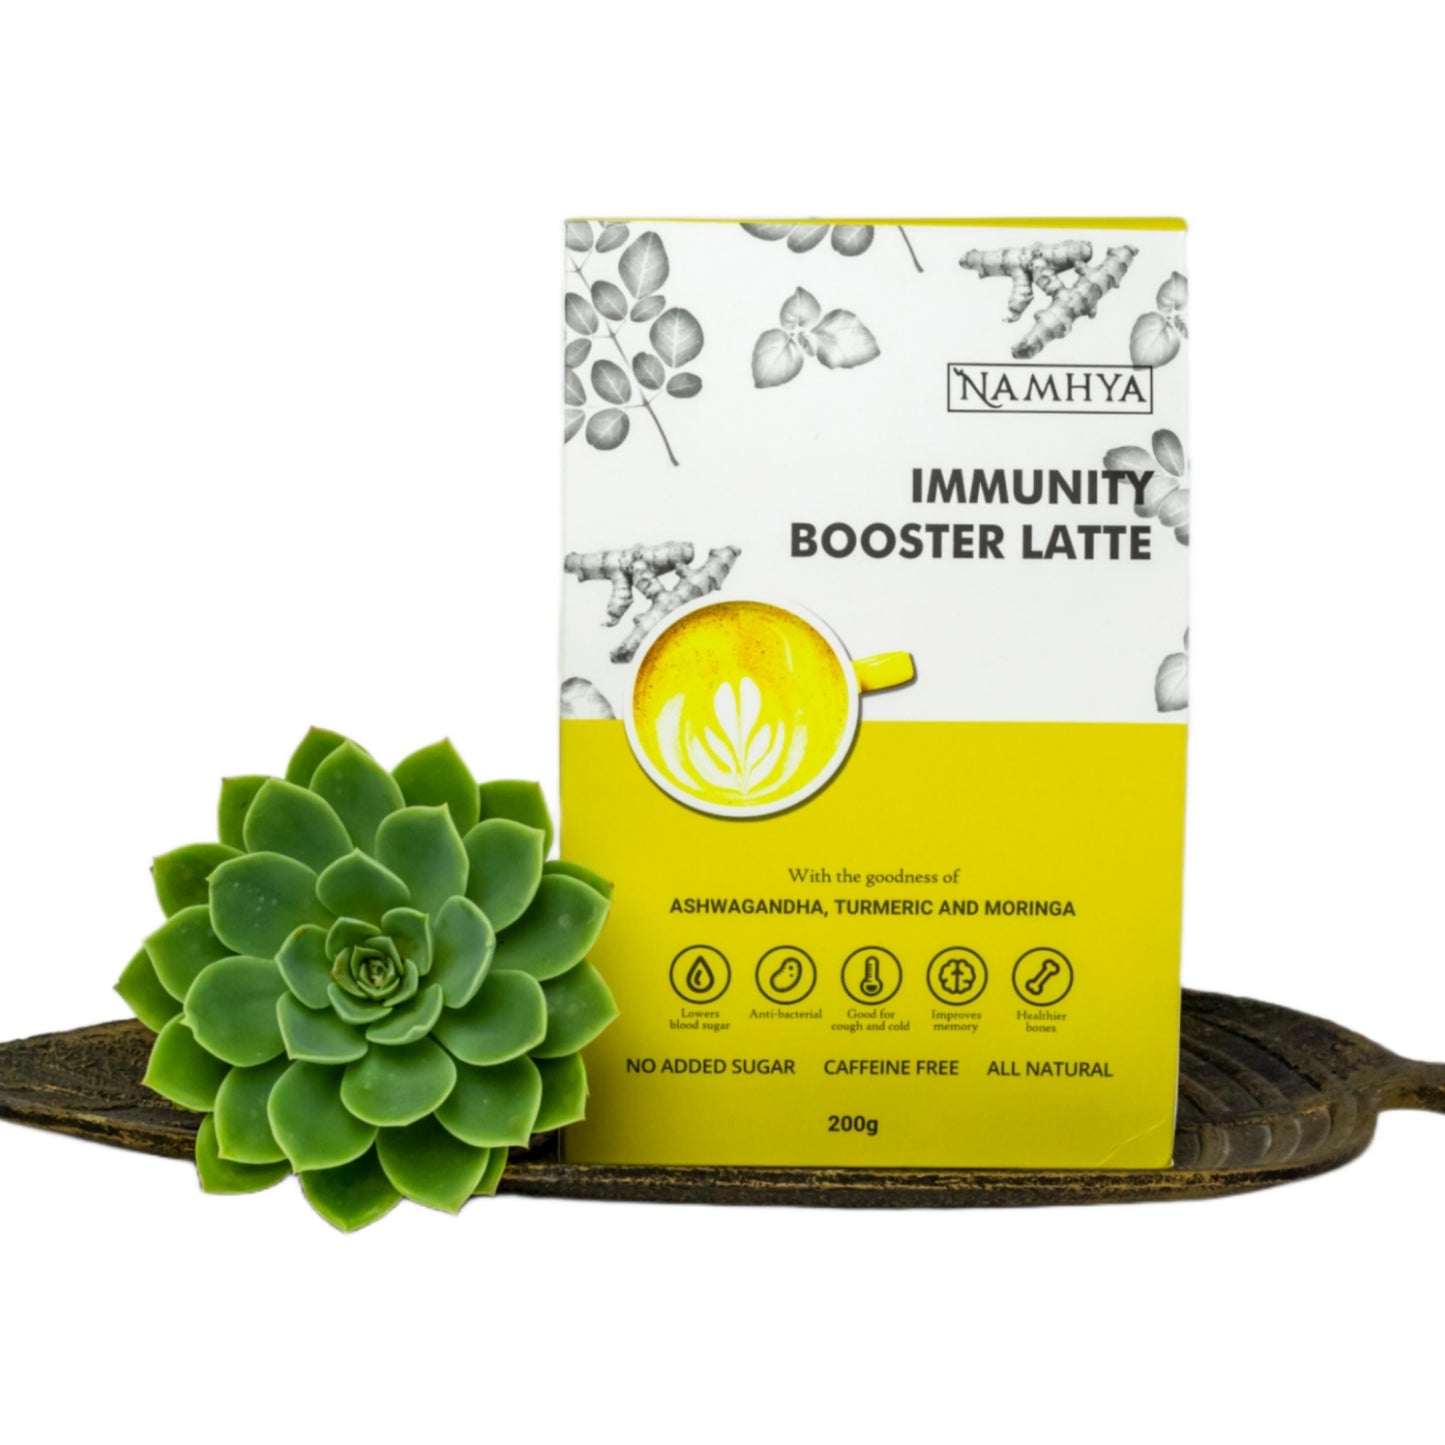 Namhya Immunity Booster Latte with Turmeric & Coconut flakes